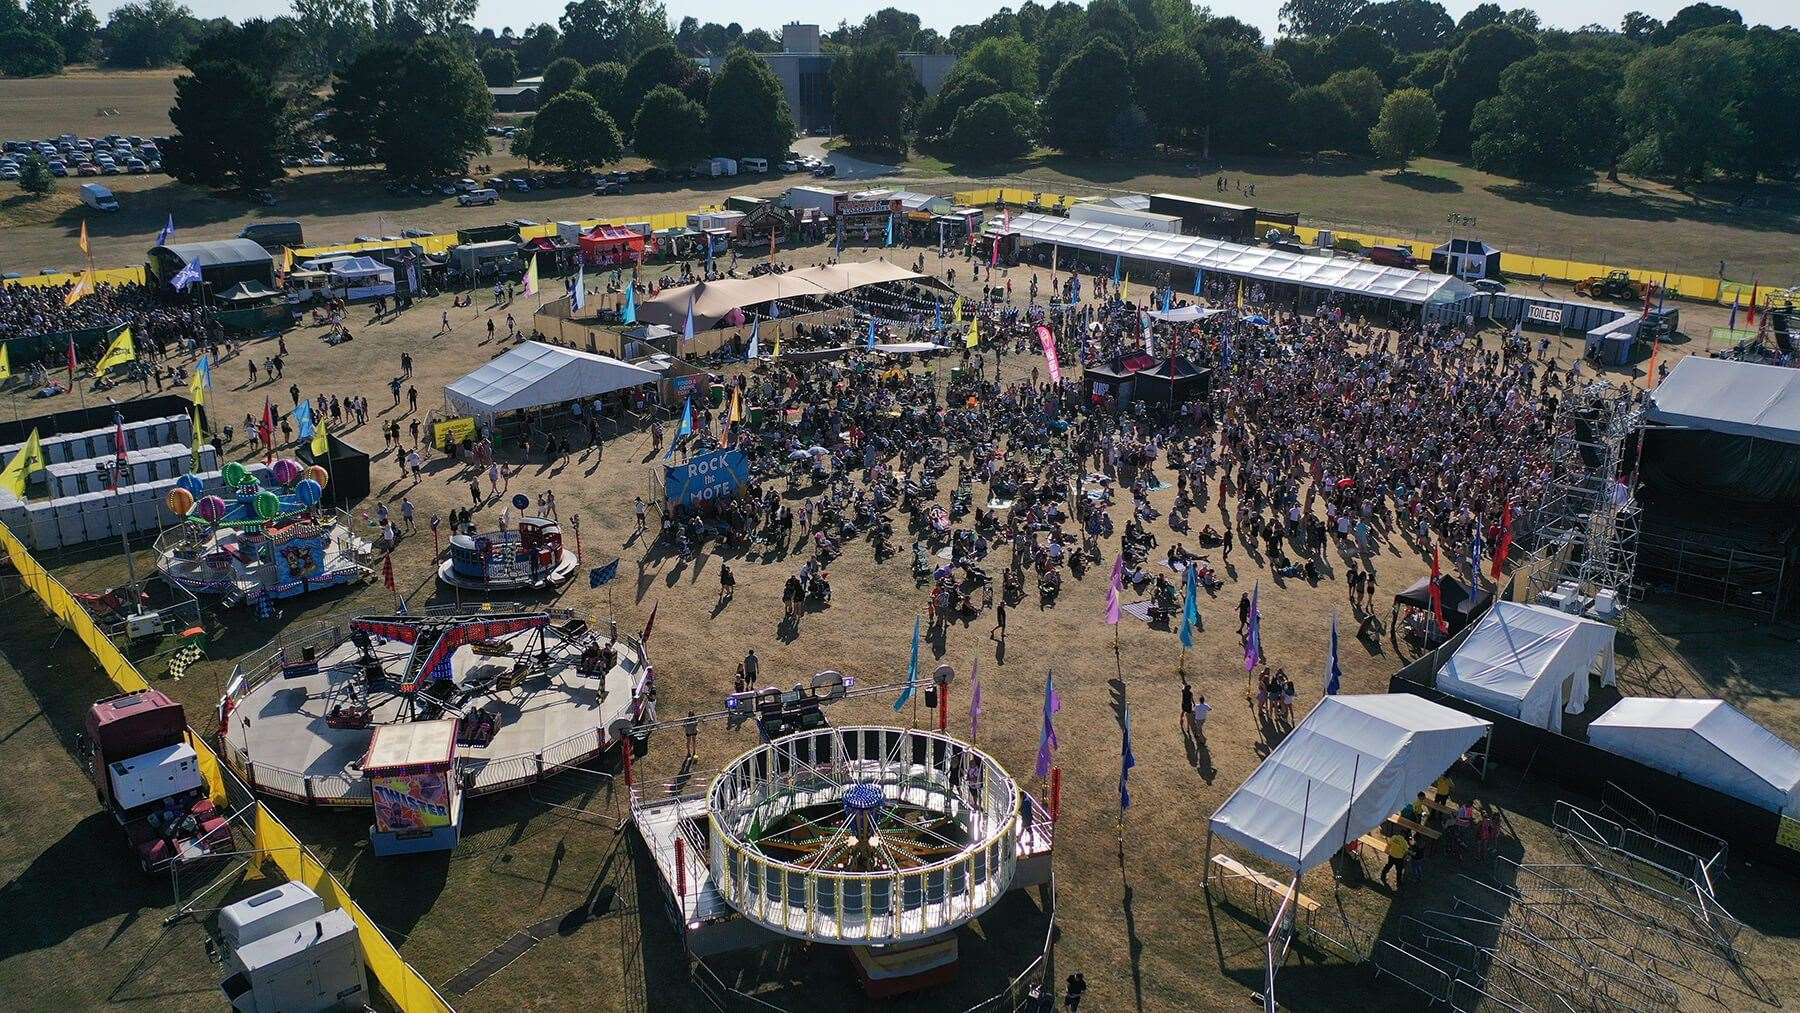 The festival will also offer street food, bars and a funfair. Picture: Lucas Live